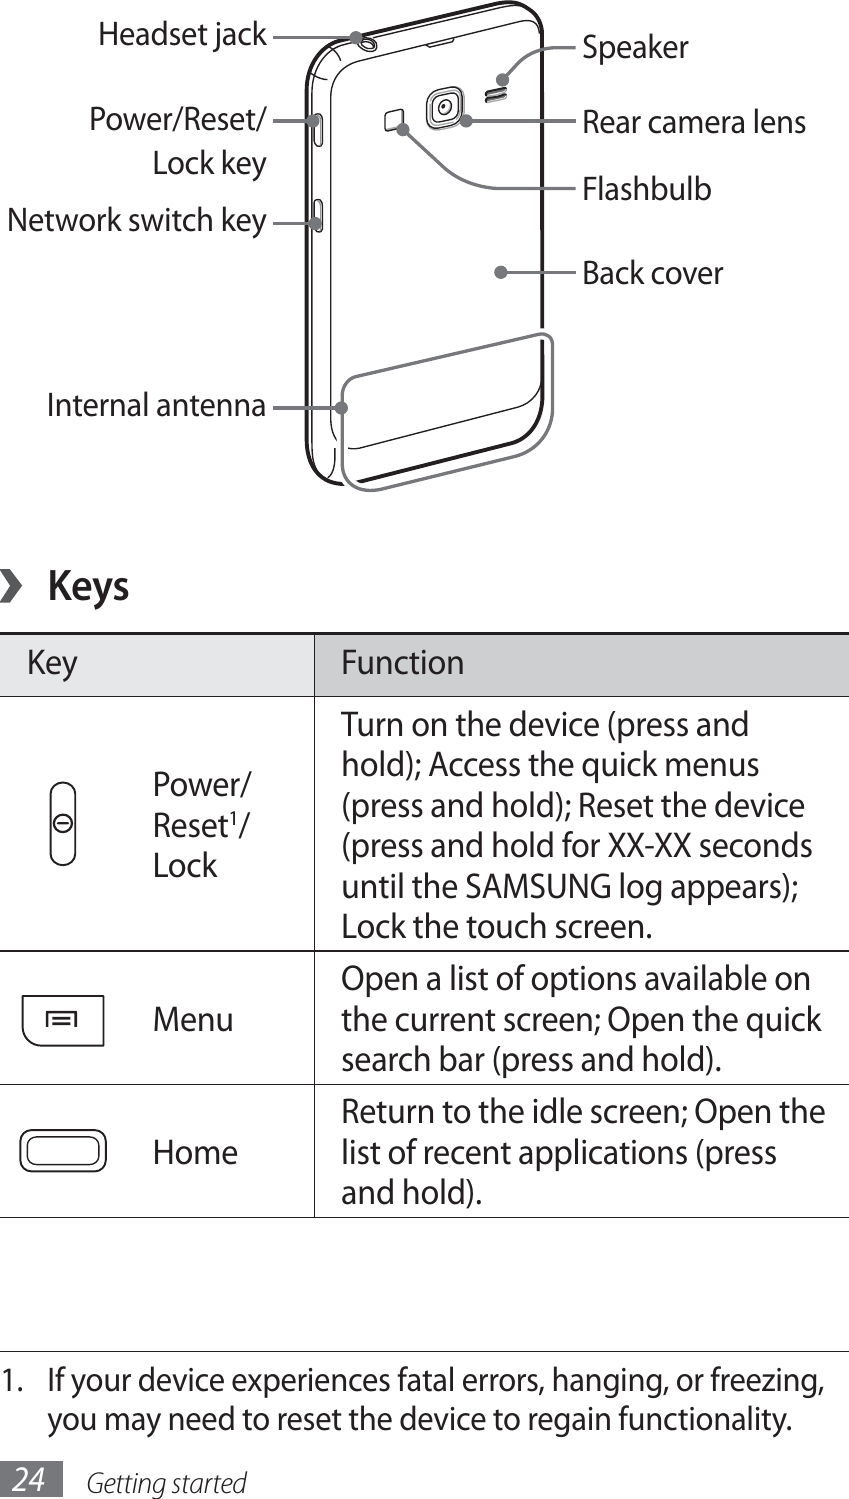 Getting started24Keys ›Key FunctionPower/Reset1/LockTurn on the device (press and hold); Access the quick menus (press and hold); Reset the device (press and hold for XX-XX seconds until the SAMSUNG log appears); Lock the touch screen.MenuOpen a list of options available on the current screen; Open the quick search bar (press and hold).HomeReturn to the idle screen; Open the list of recent applications (press and hold).1.  If your device experiences fatal errors, hanging, or freezing, you may need to reset the device to regain functionality.Internal antennaHeadset jack Power/Reset/Lock keyNetwork switch keyBack coverSpeakerRear camera lensFlashbulb